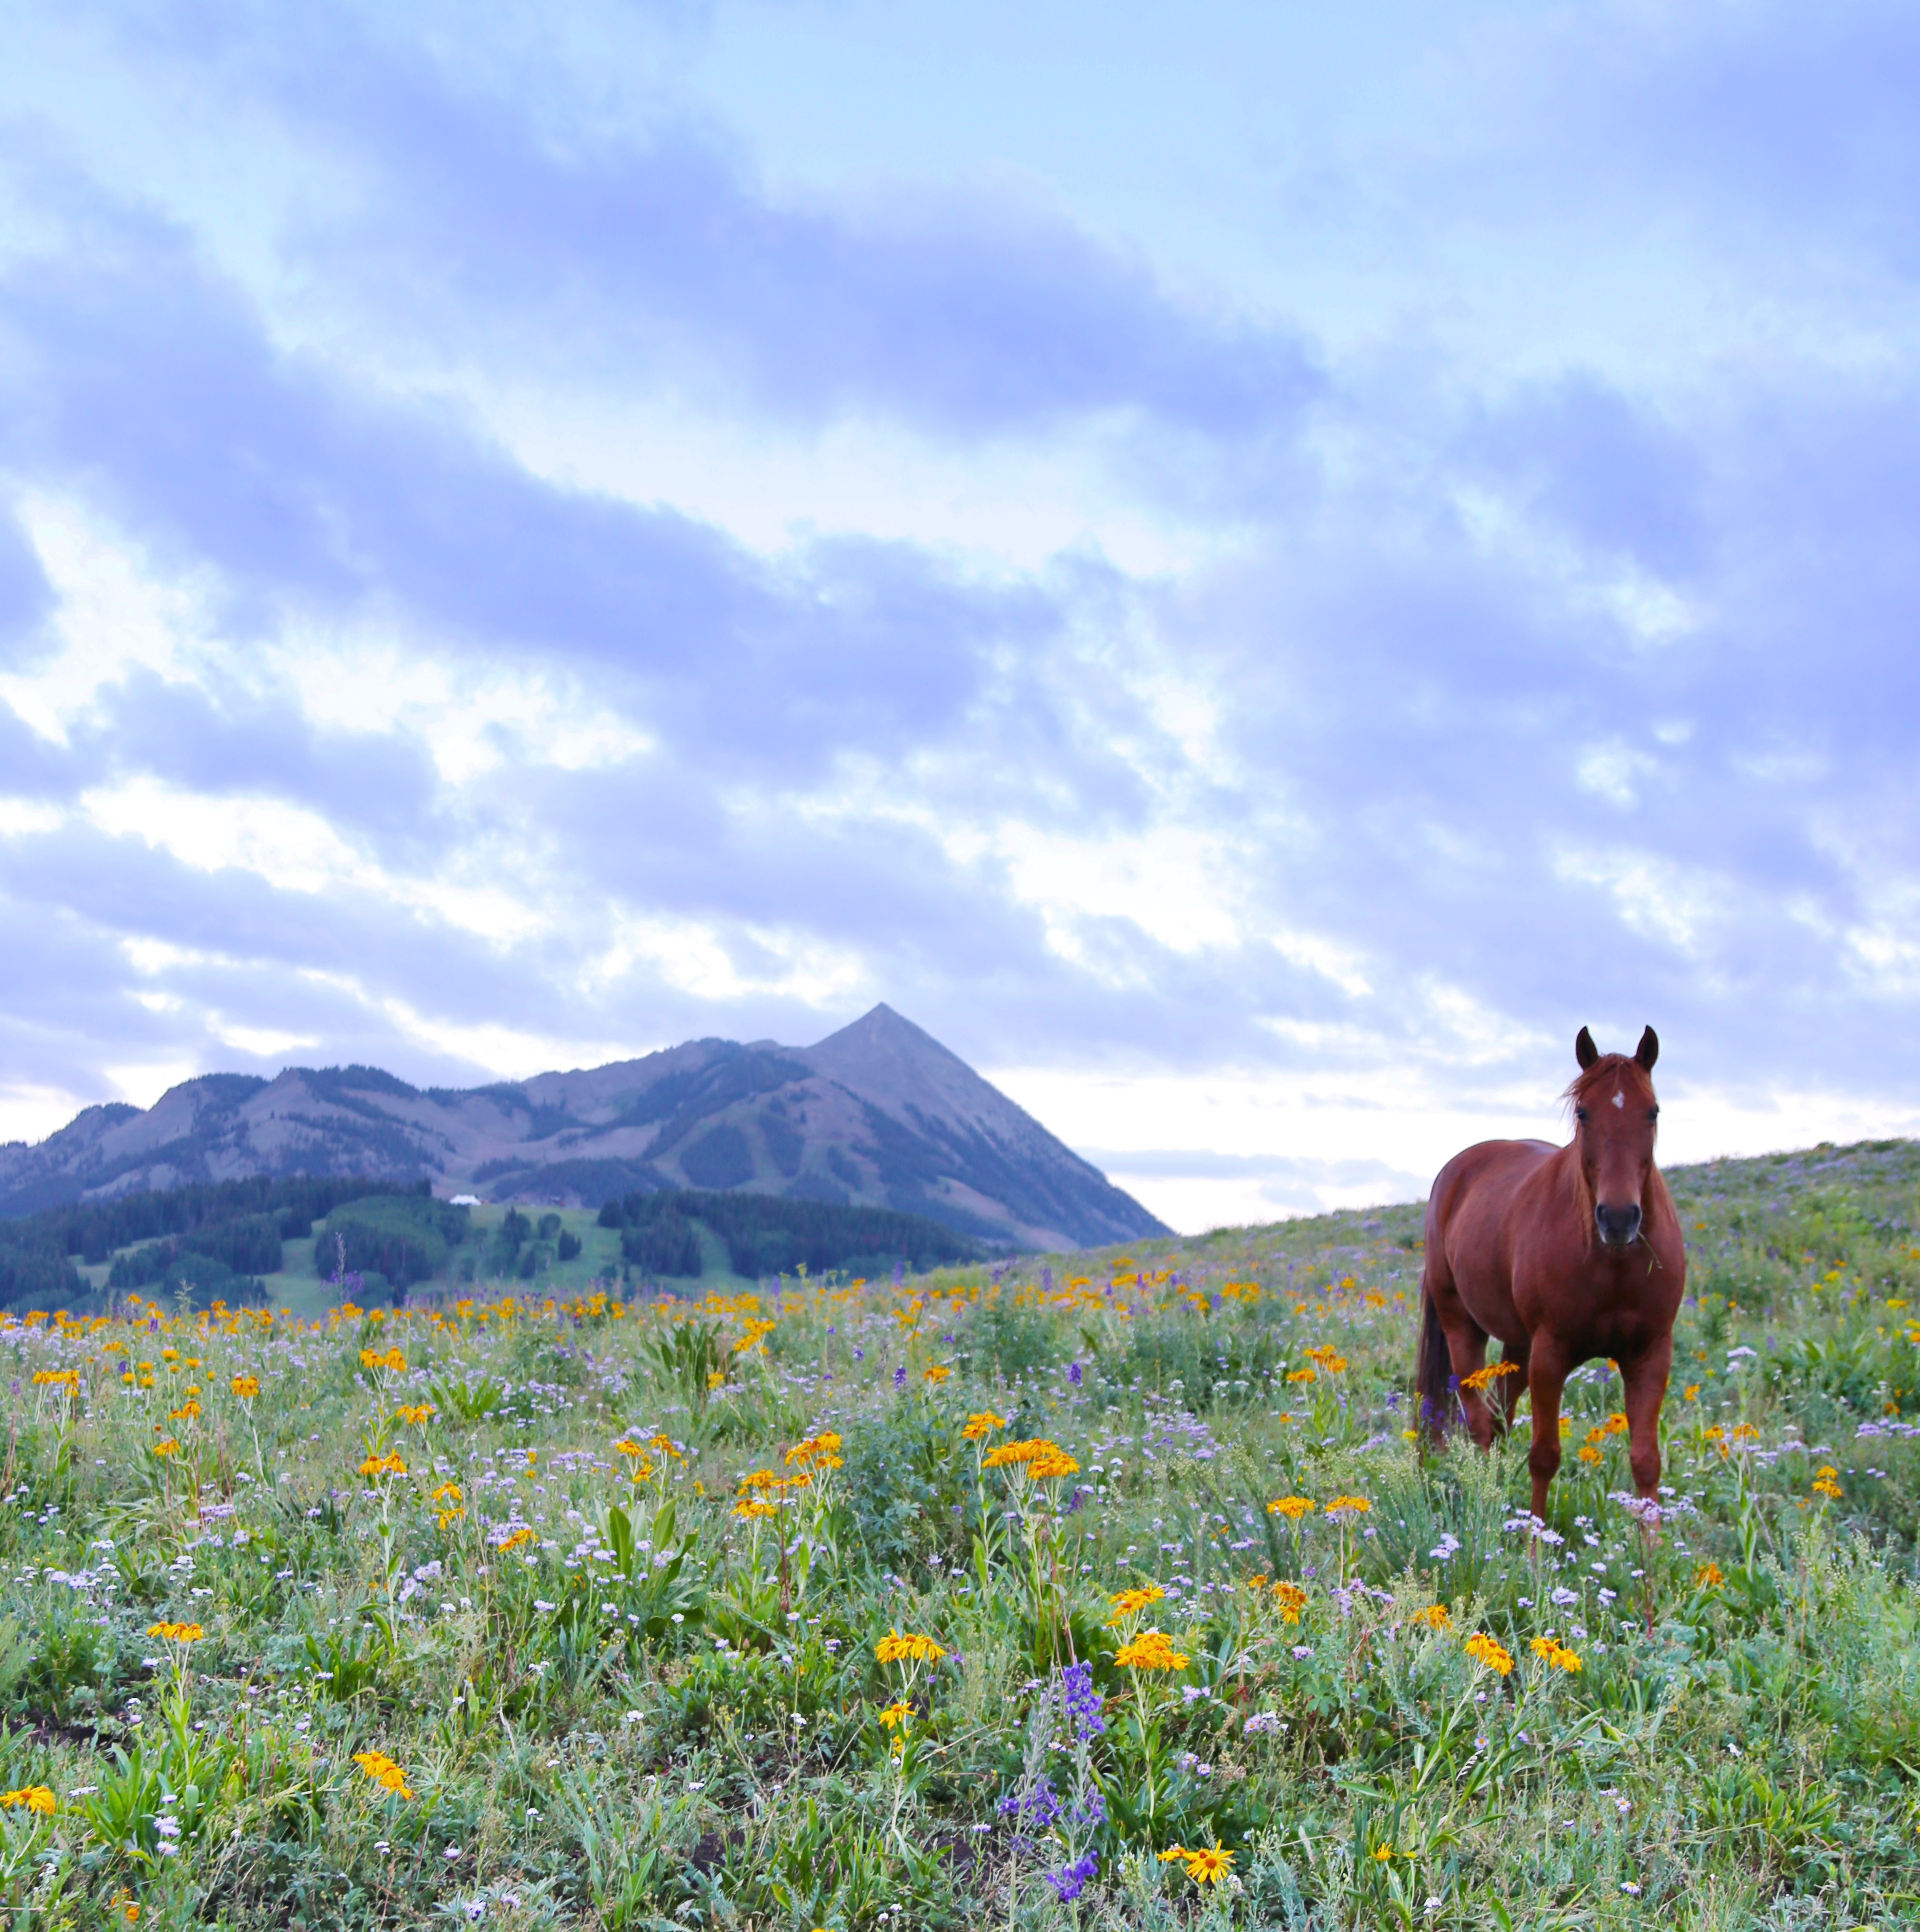 A horse walking on grass with wildflowers and blue mountains in the horizon.